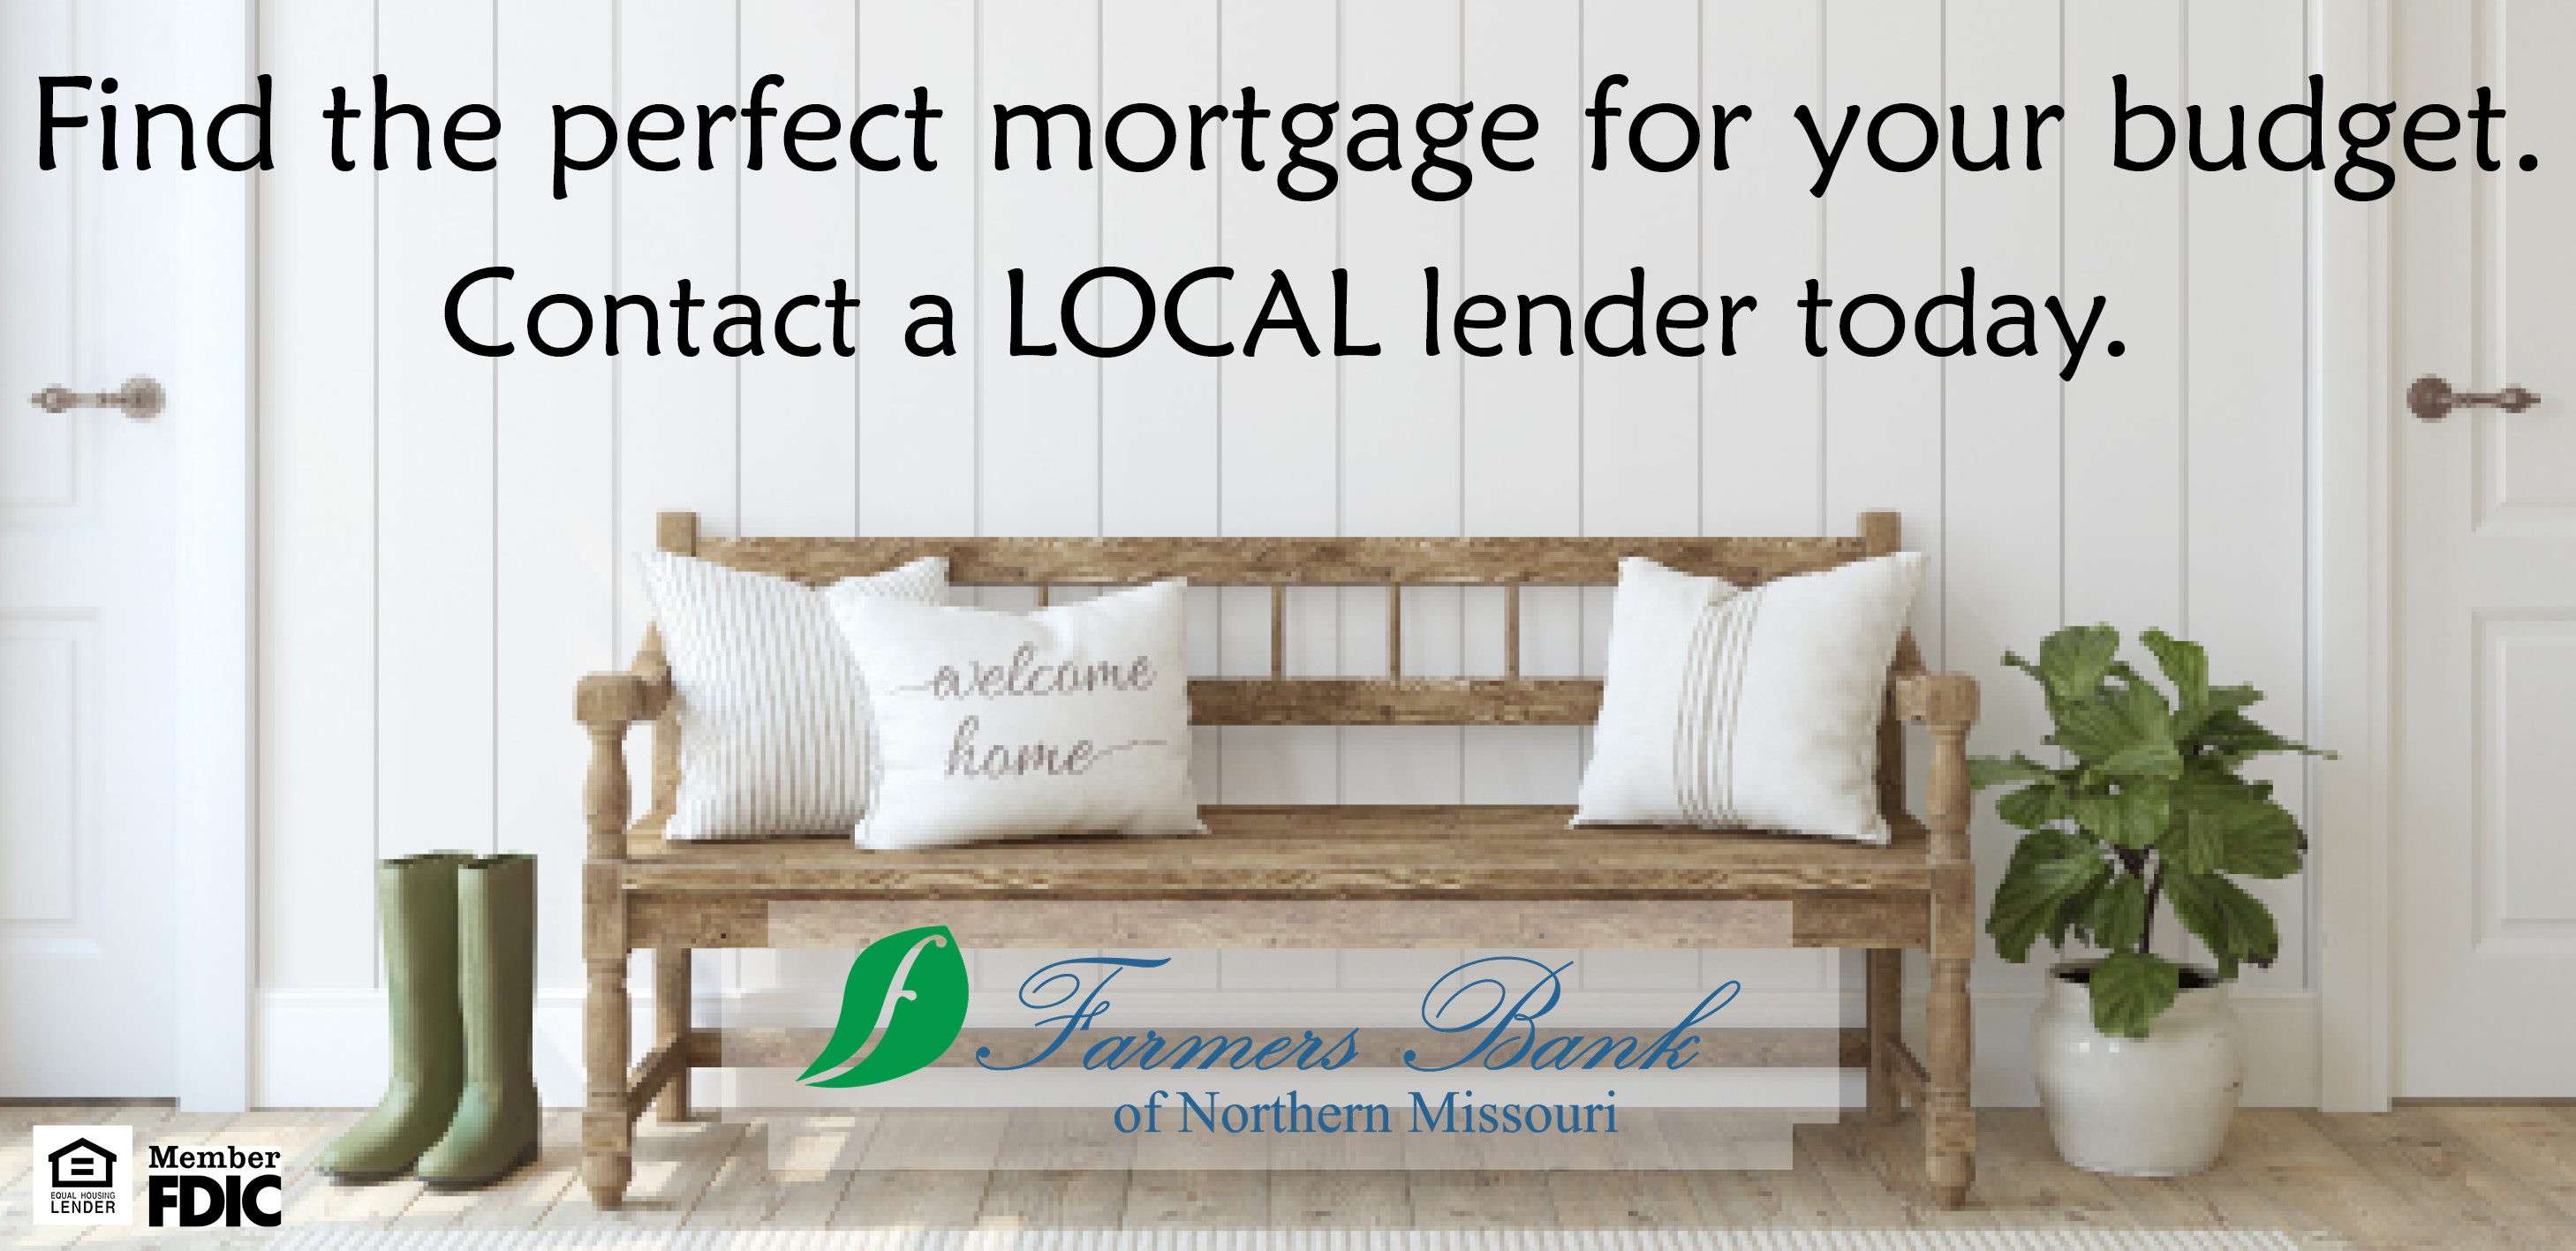 Find the perfect mortgage for your budget. Contact a local lender today. Farmers Bank of Northern Missouri, Member FDIC, Equal Housing Lender